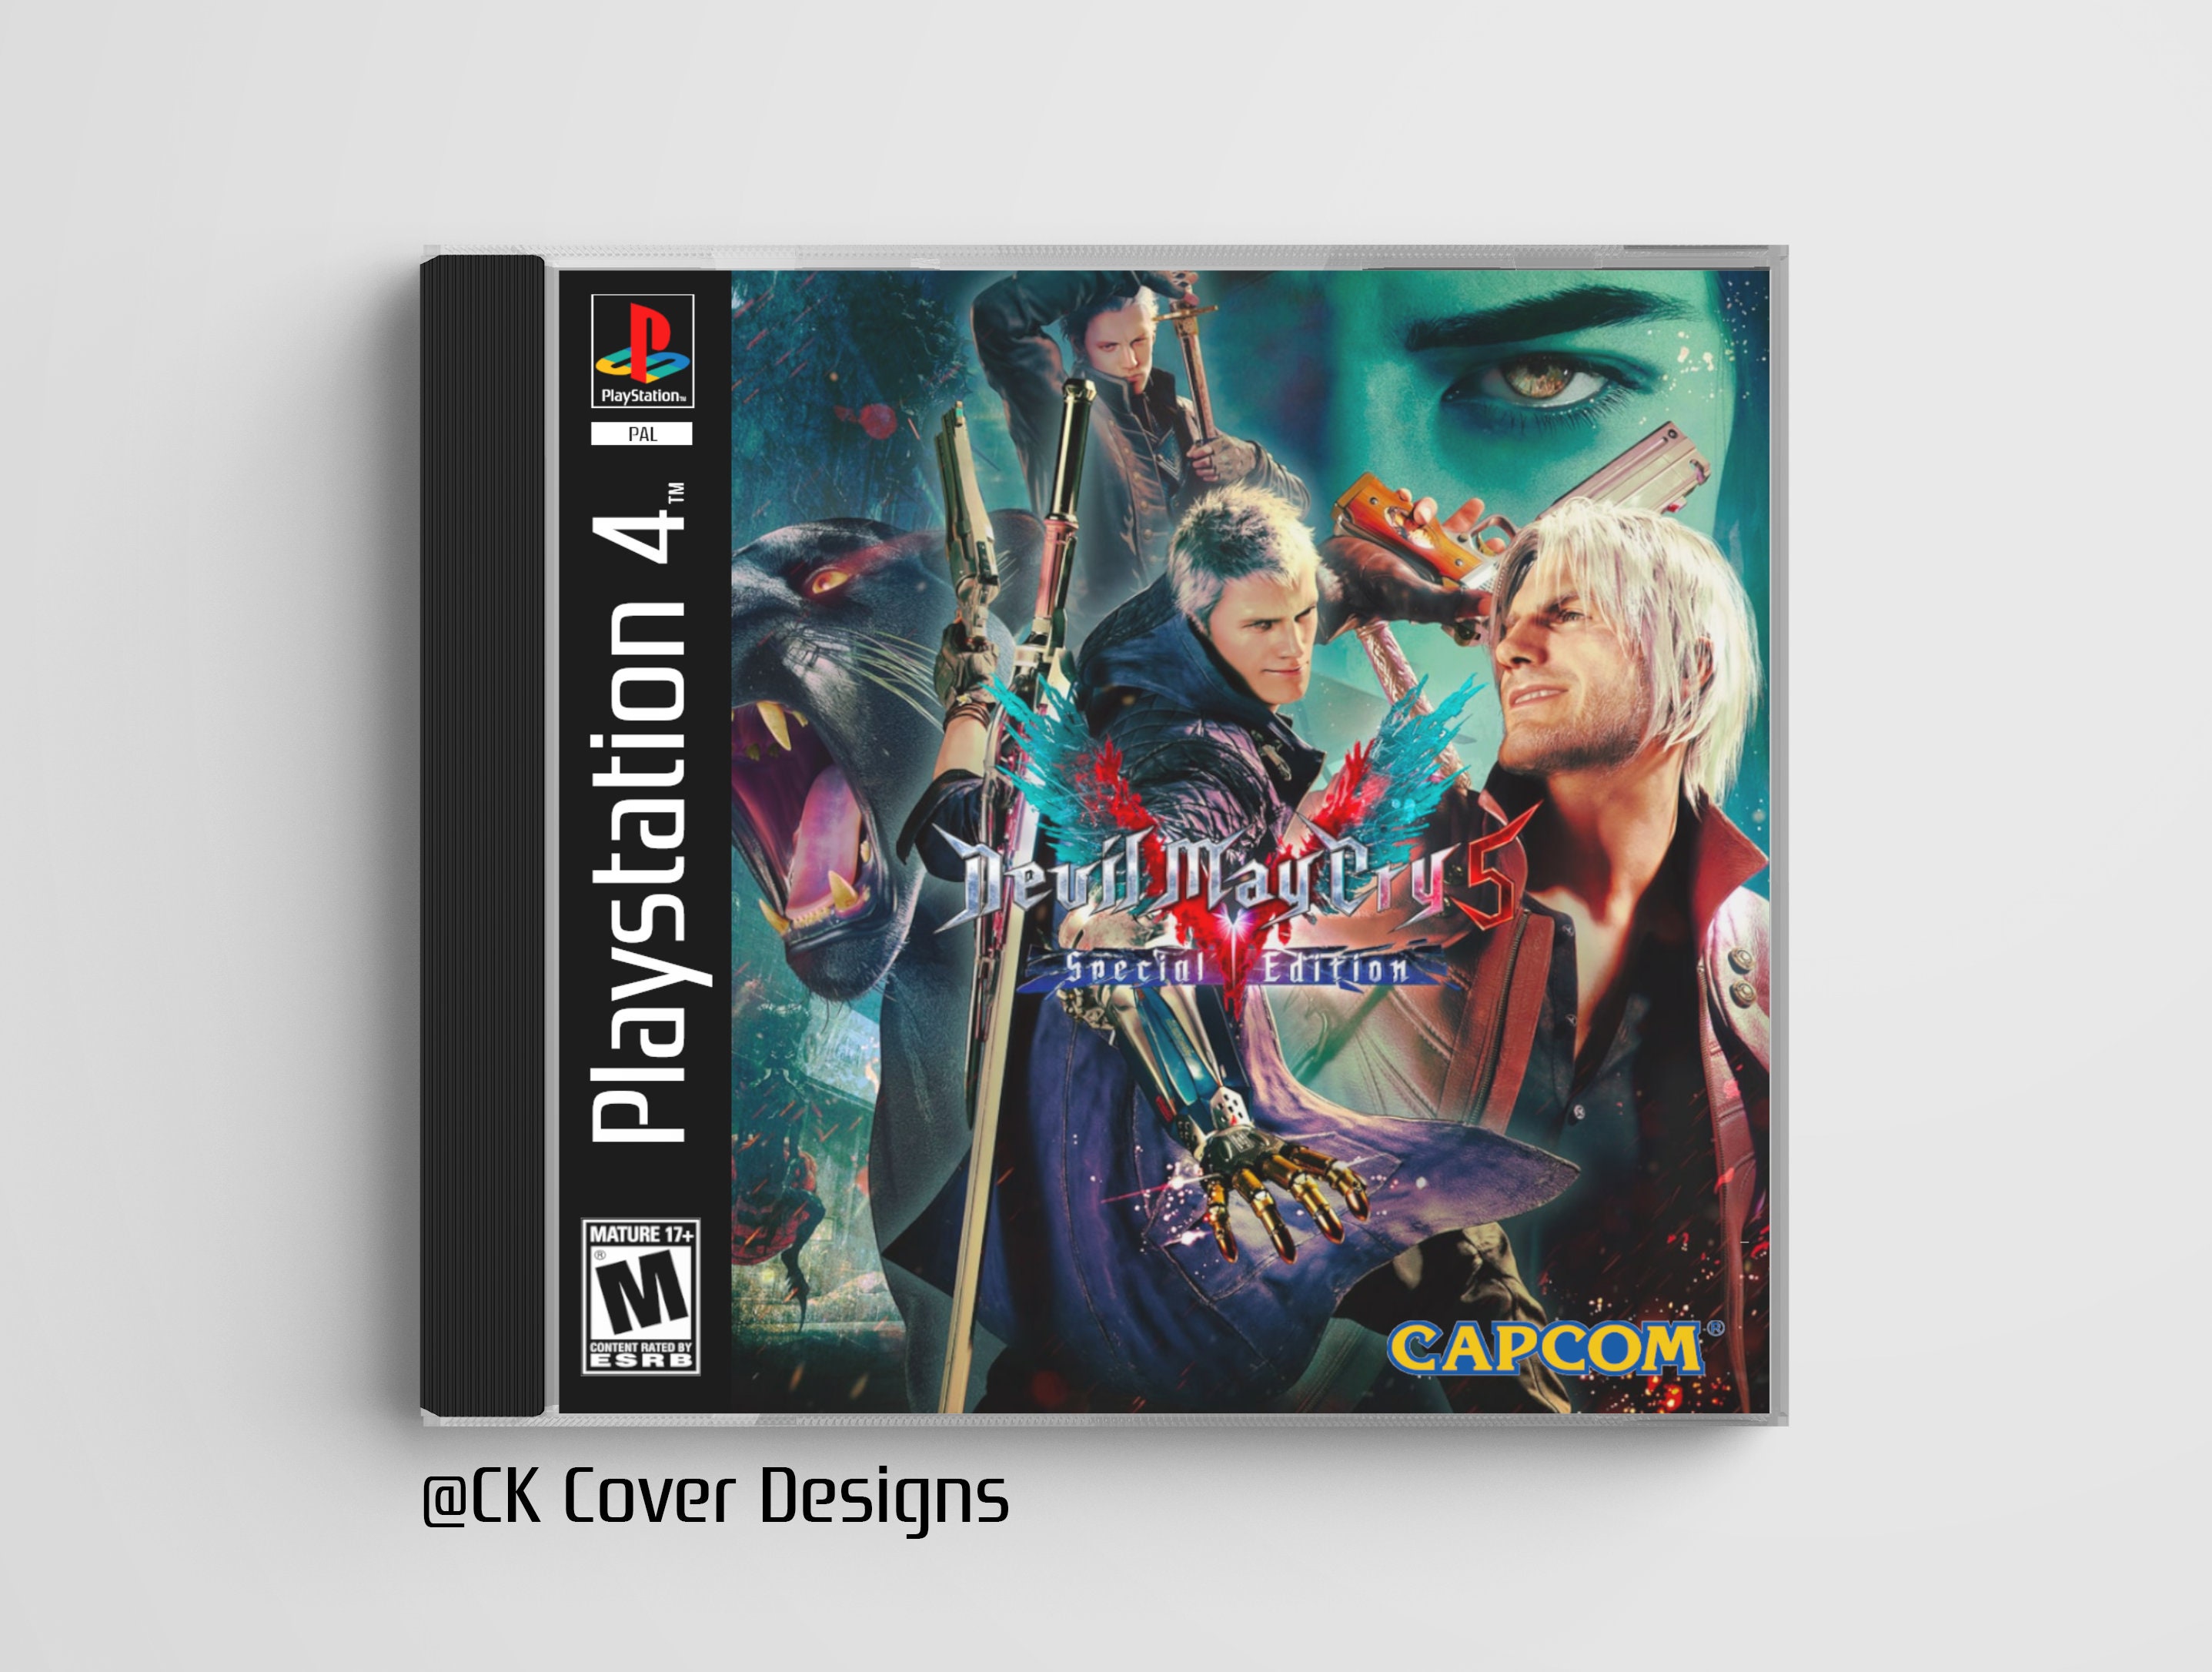 Devil May Cry 5 Special Edition - PlayStation 5